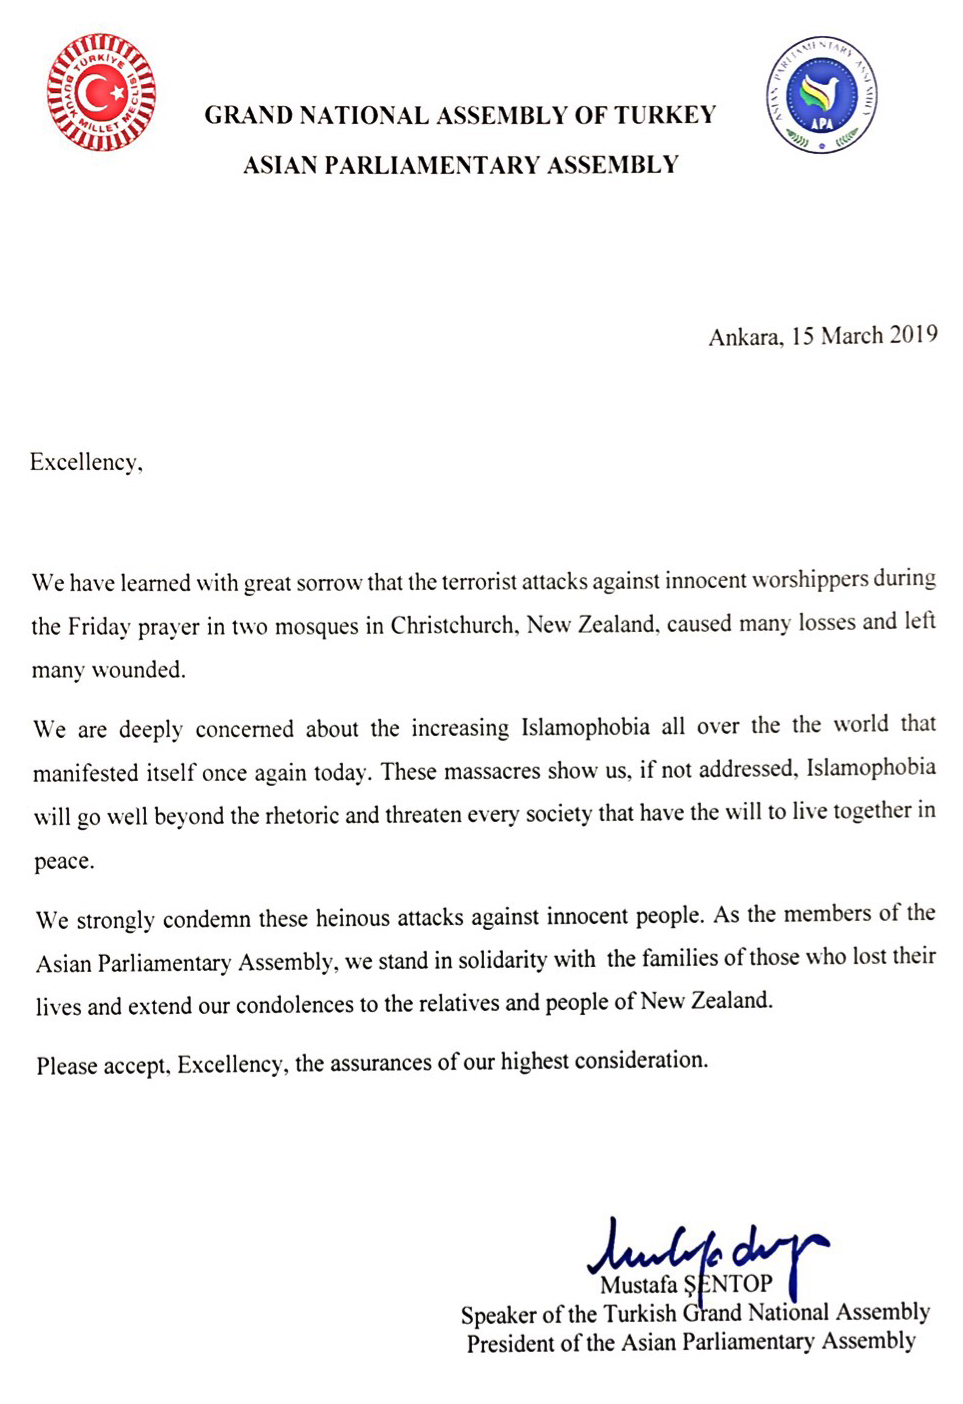 Message of Condemnation and Condolences from APA President 